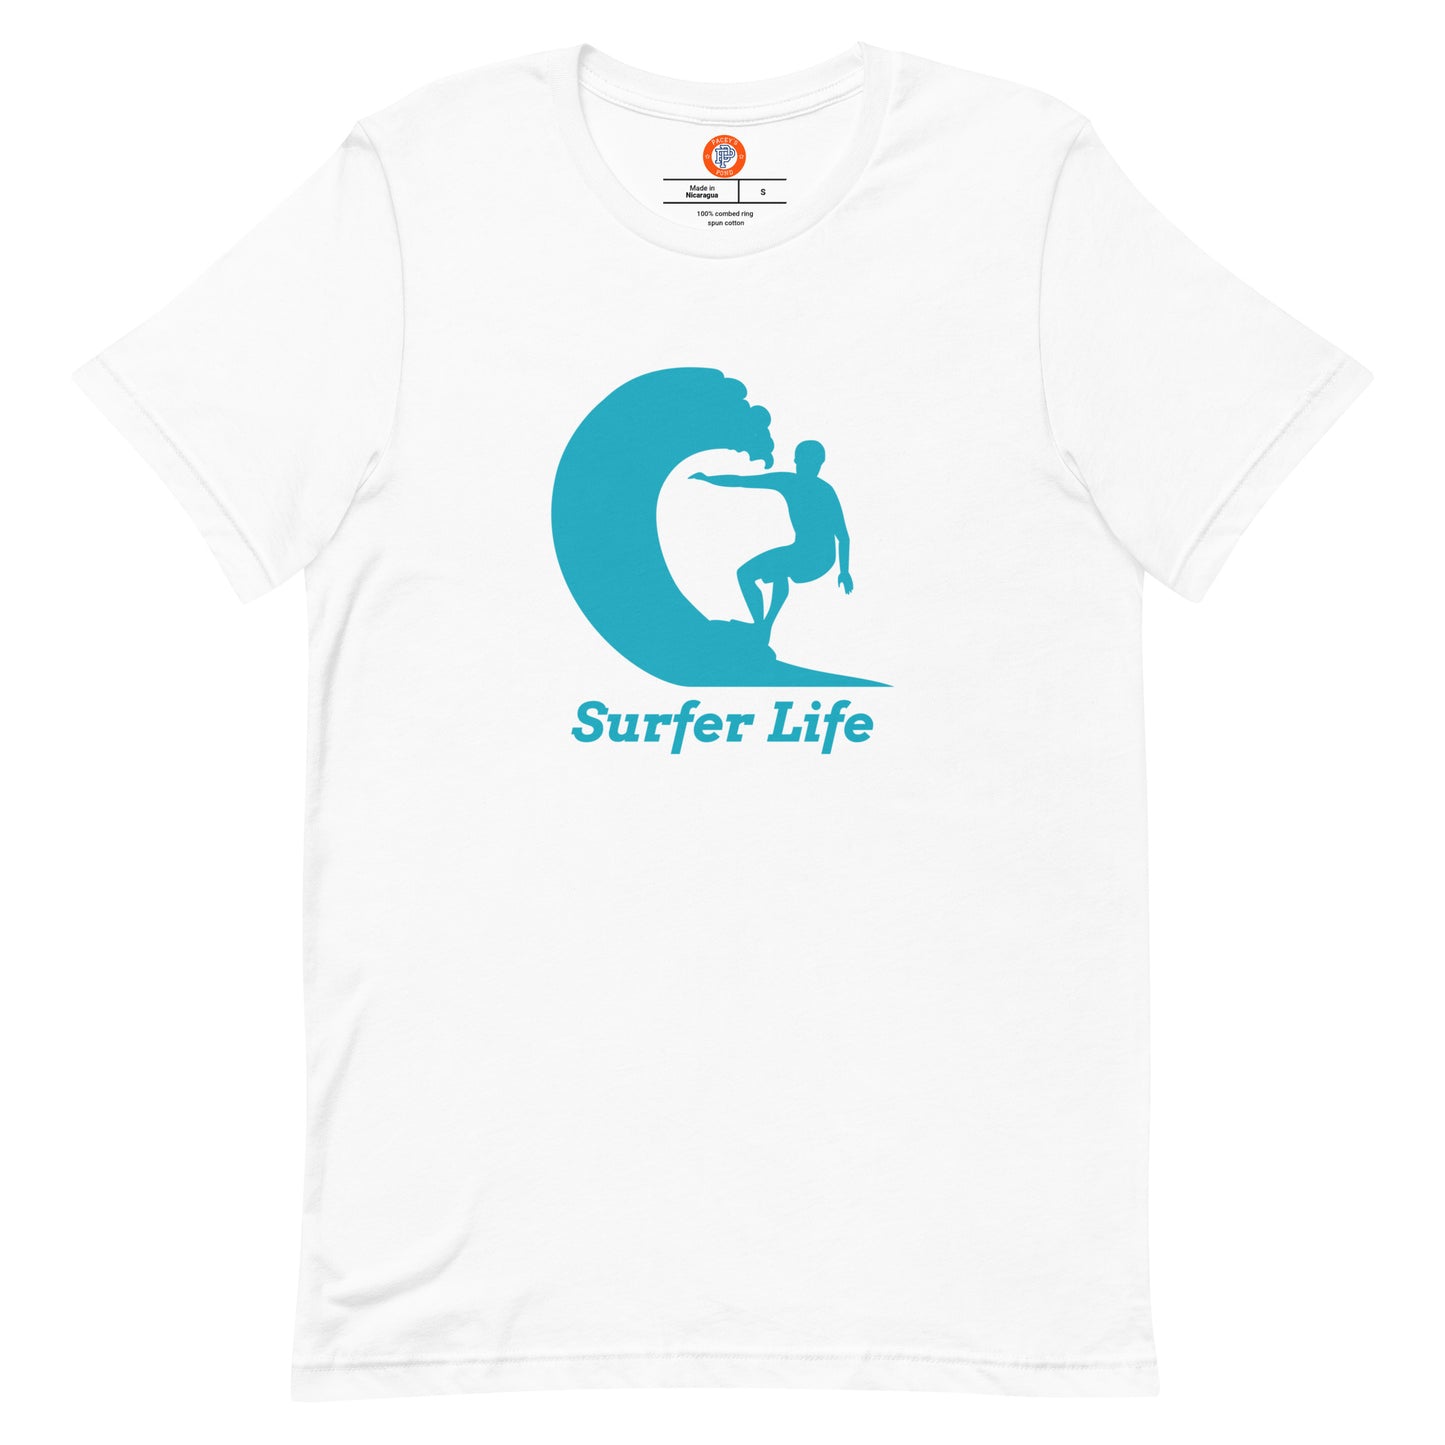 Men's Surfing Graphic Tee - Surfer Life